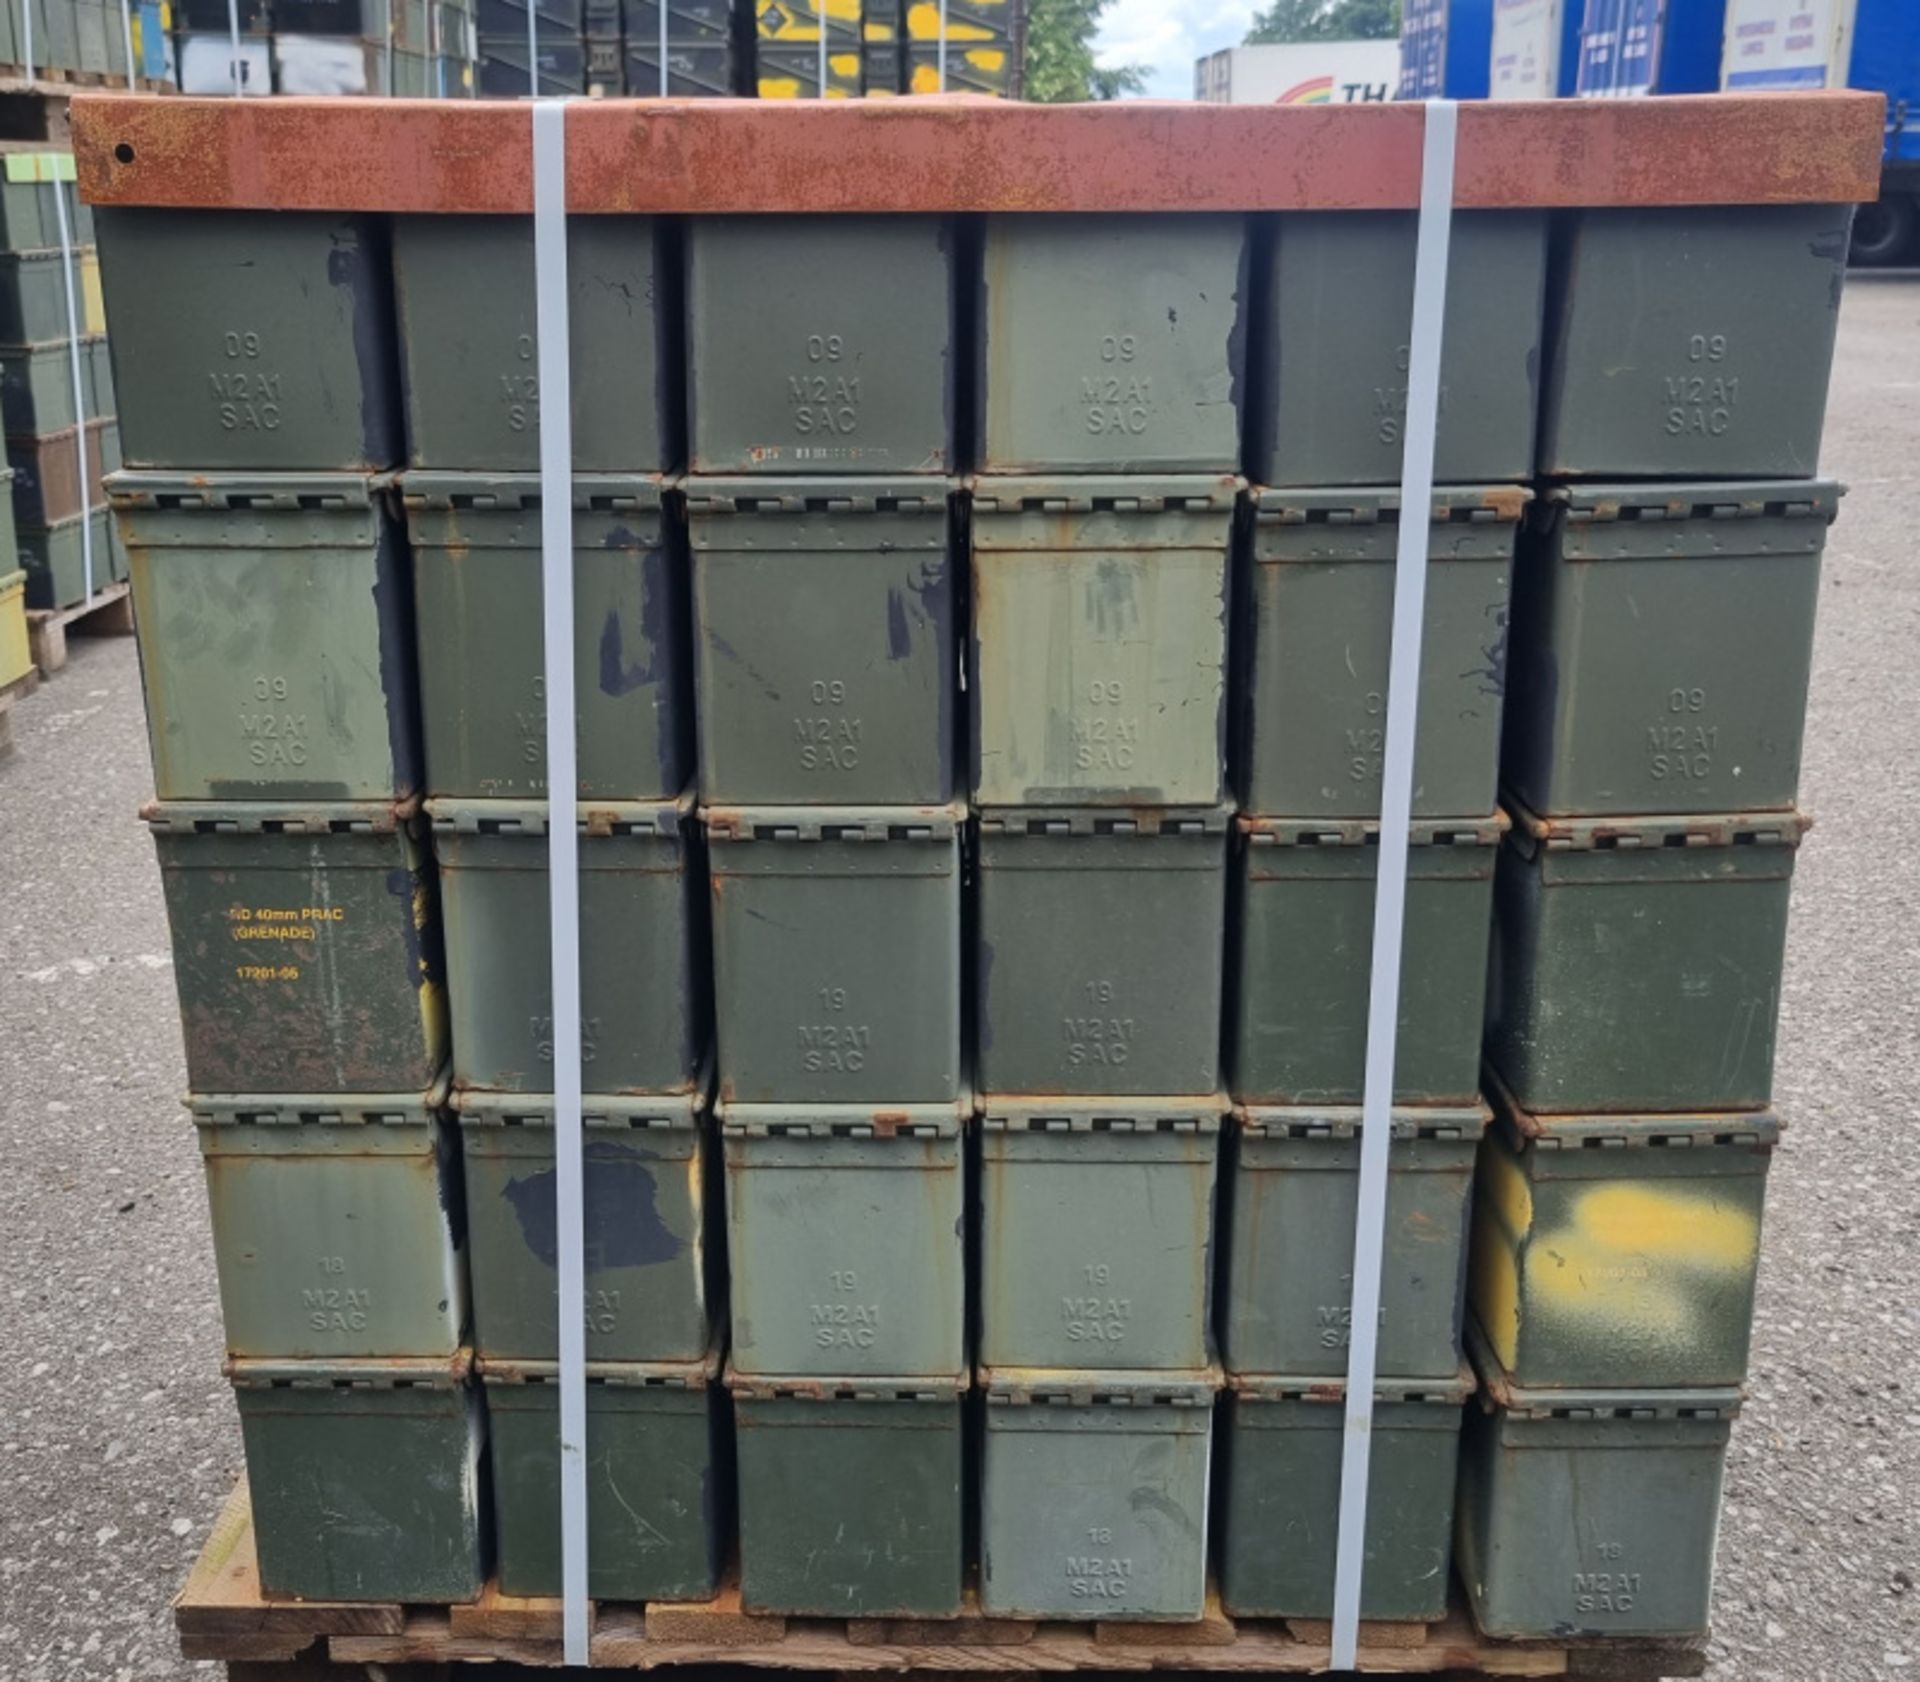 1x Pallet of M2A1 ammo containers - total quantity 120 - Image 4 of 11